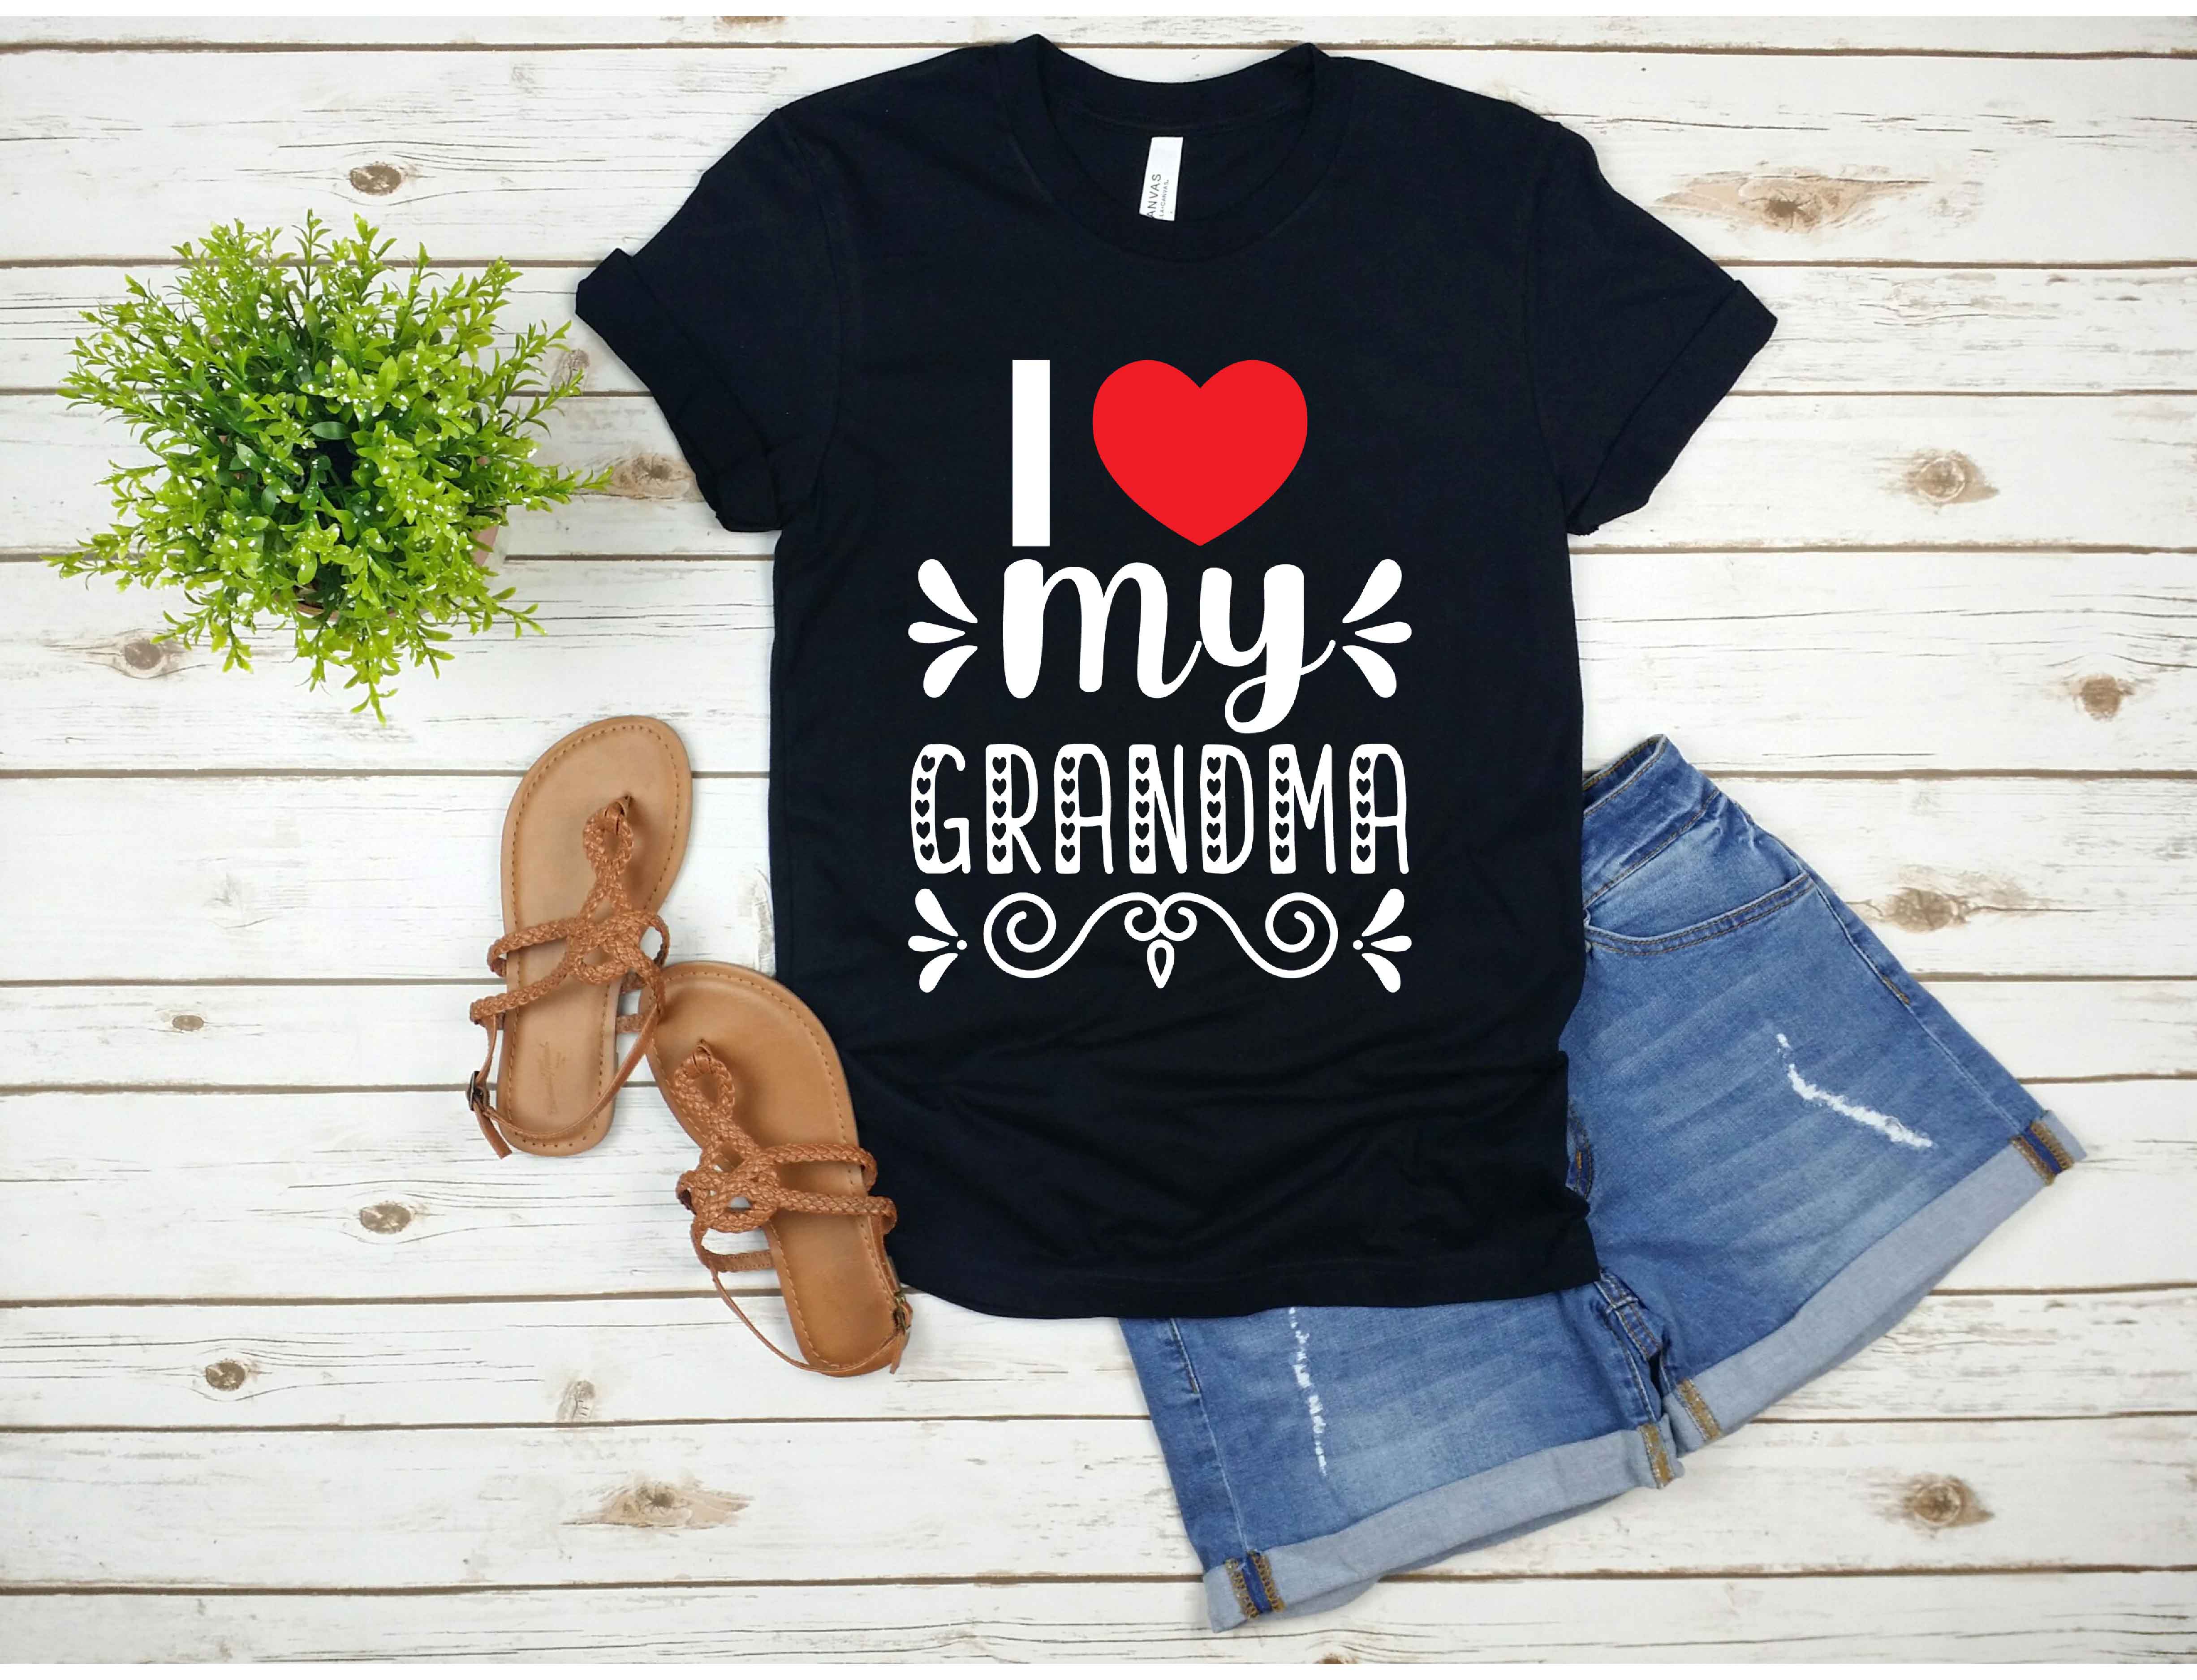 T - shirt that says i love my grandma with a heart.